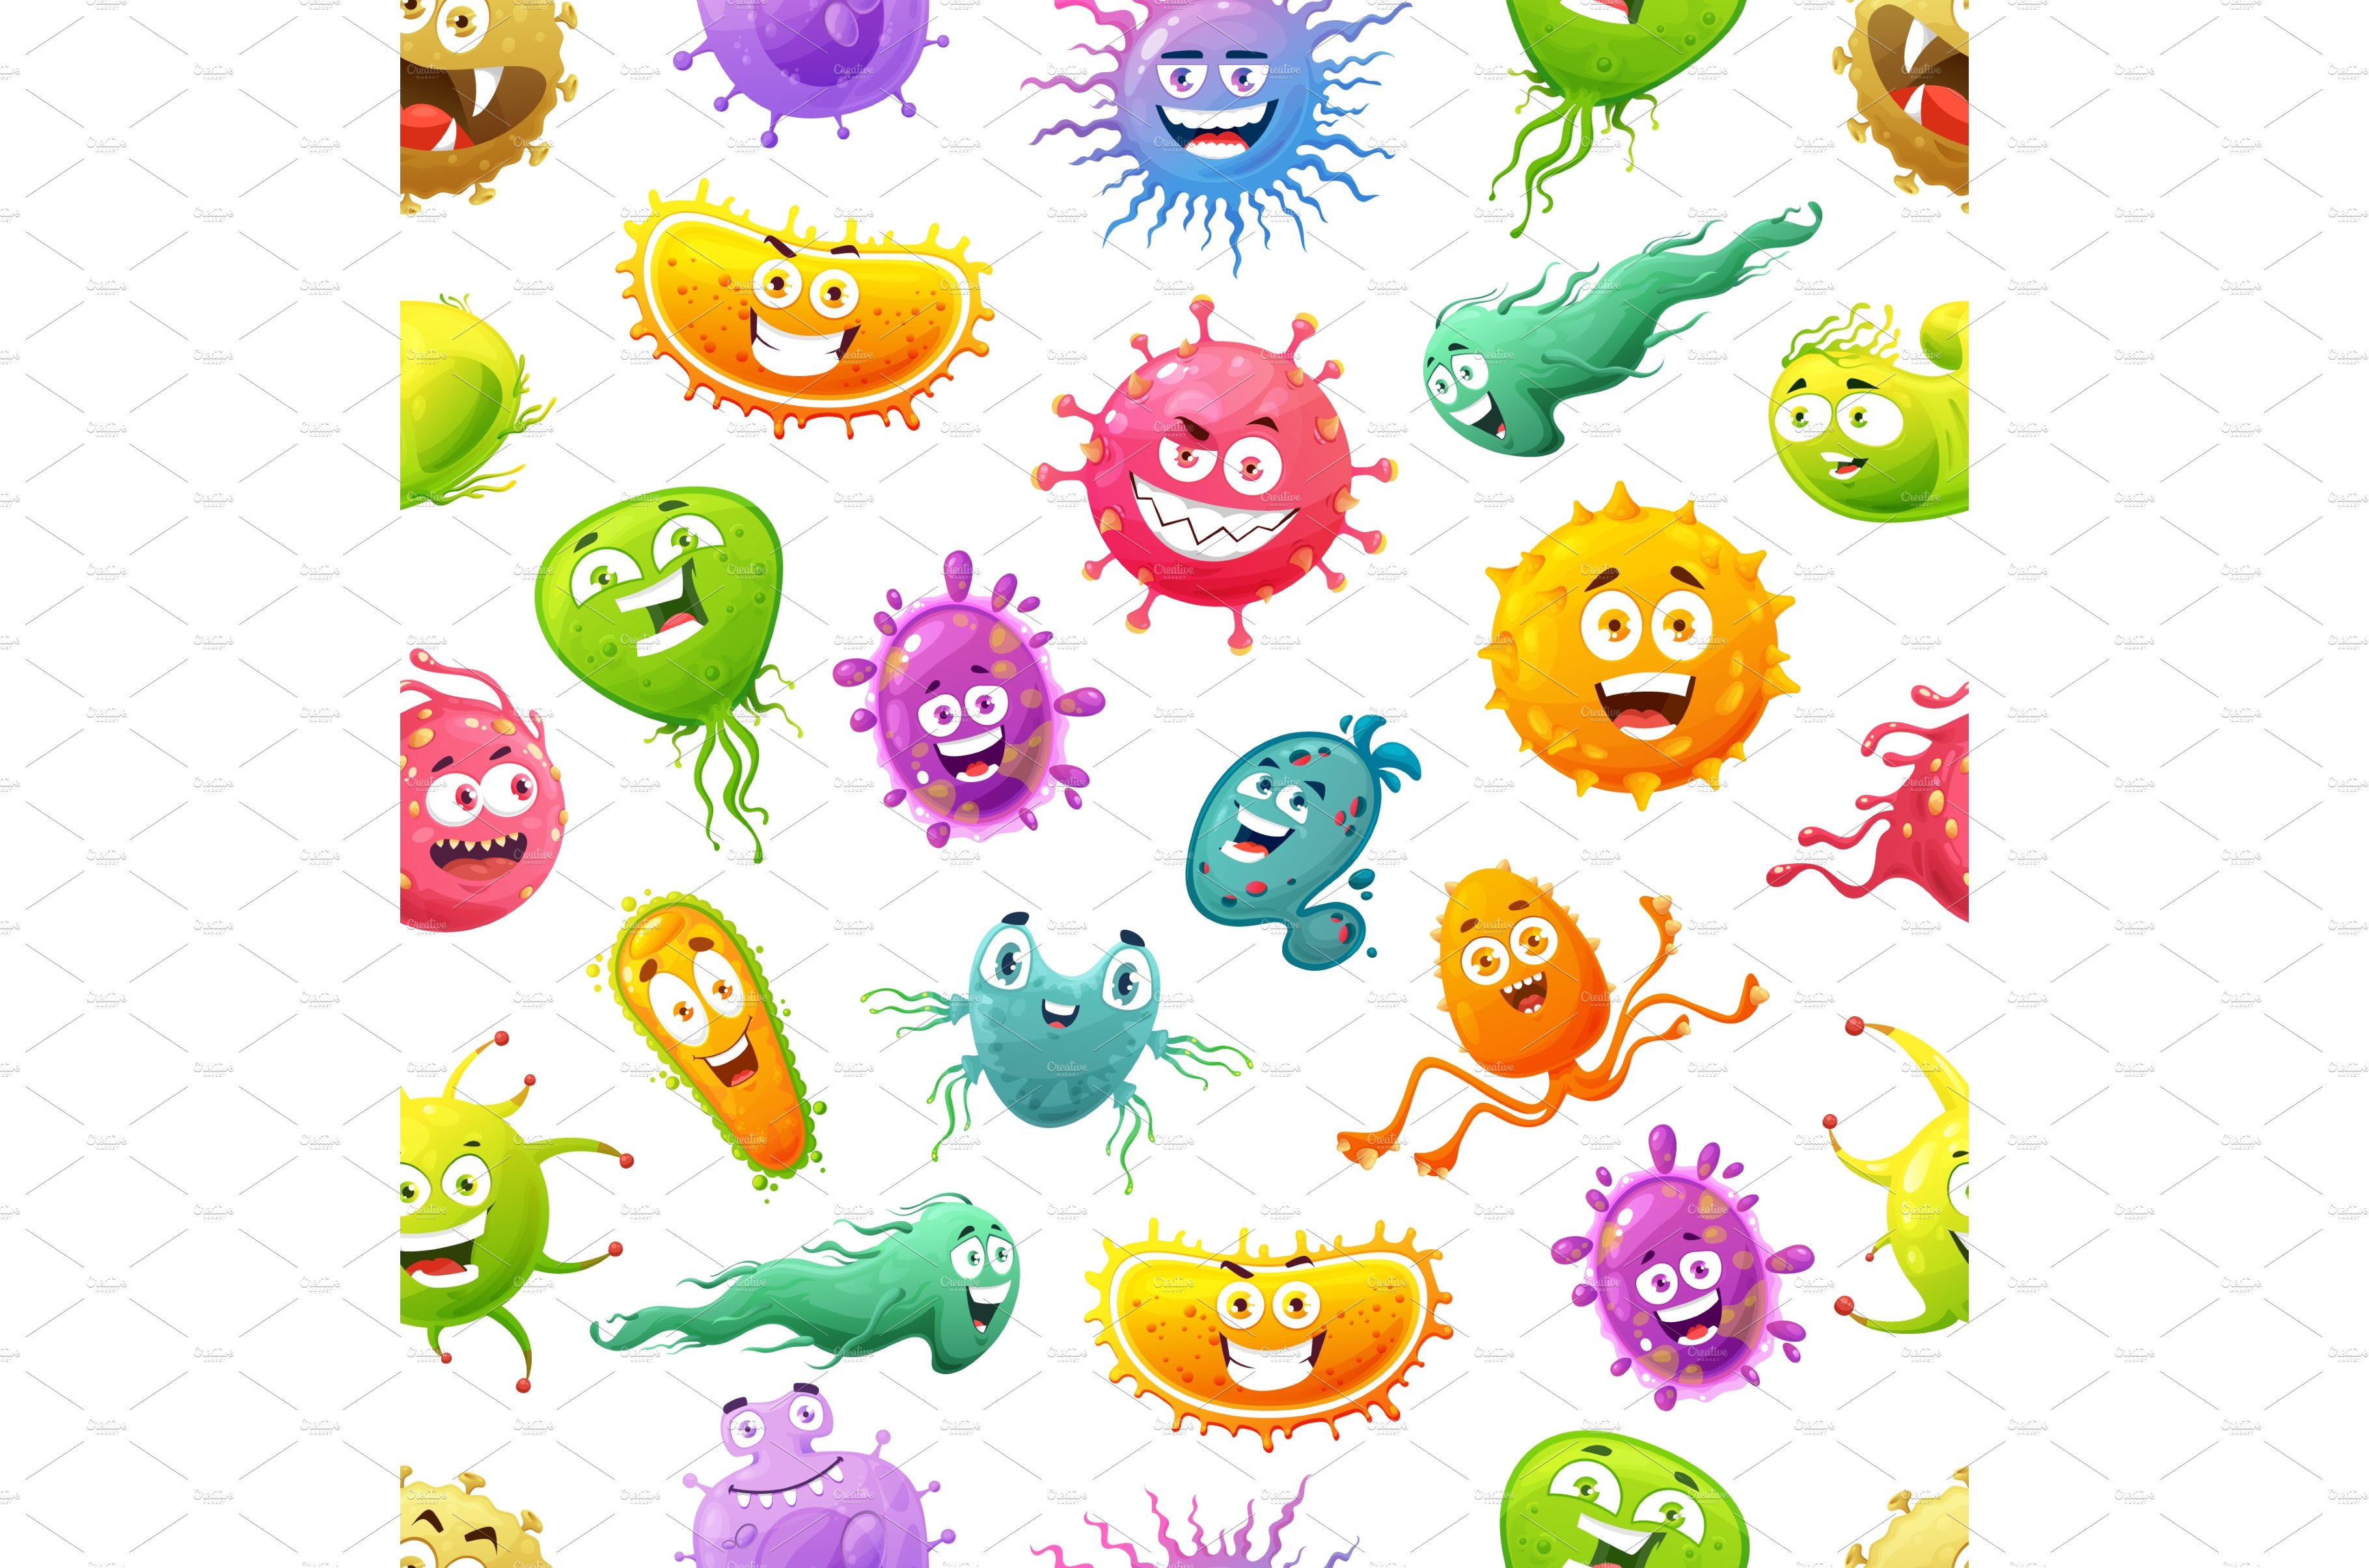 Virus, bacteria, germ pattern cover image.